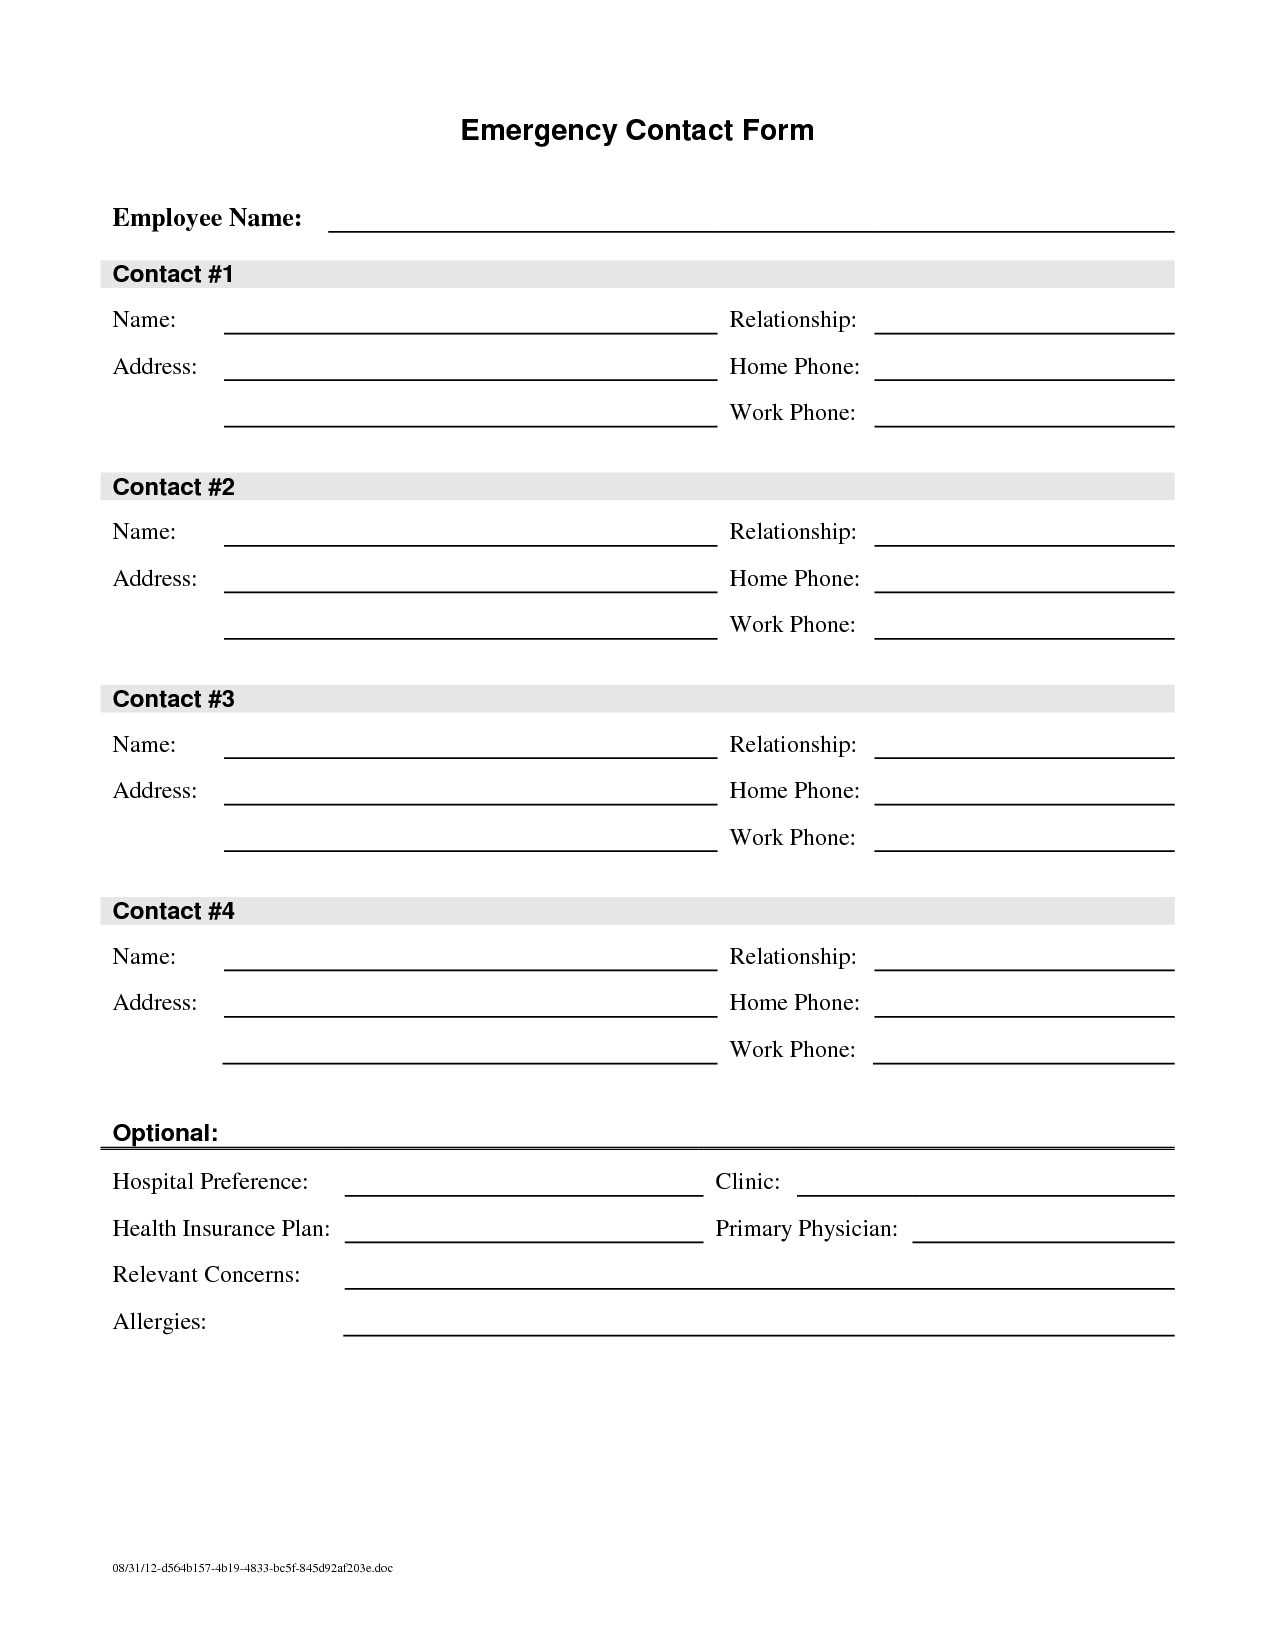 7 Best Images of Emergency Contact Printable Form - Printable Emergency ...